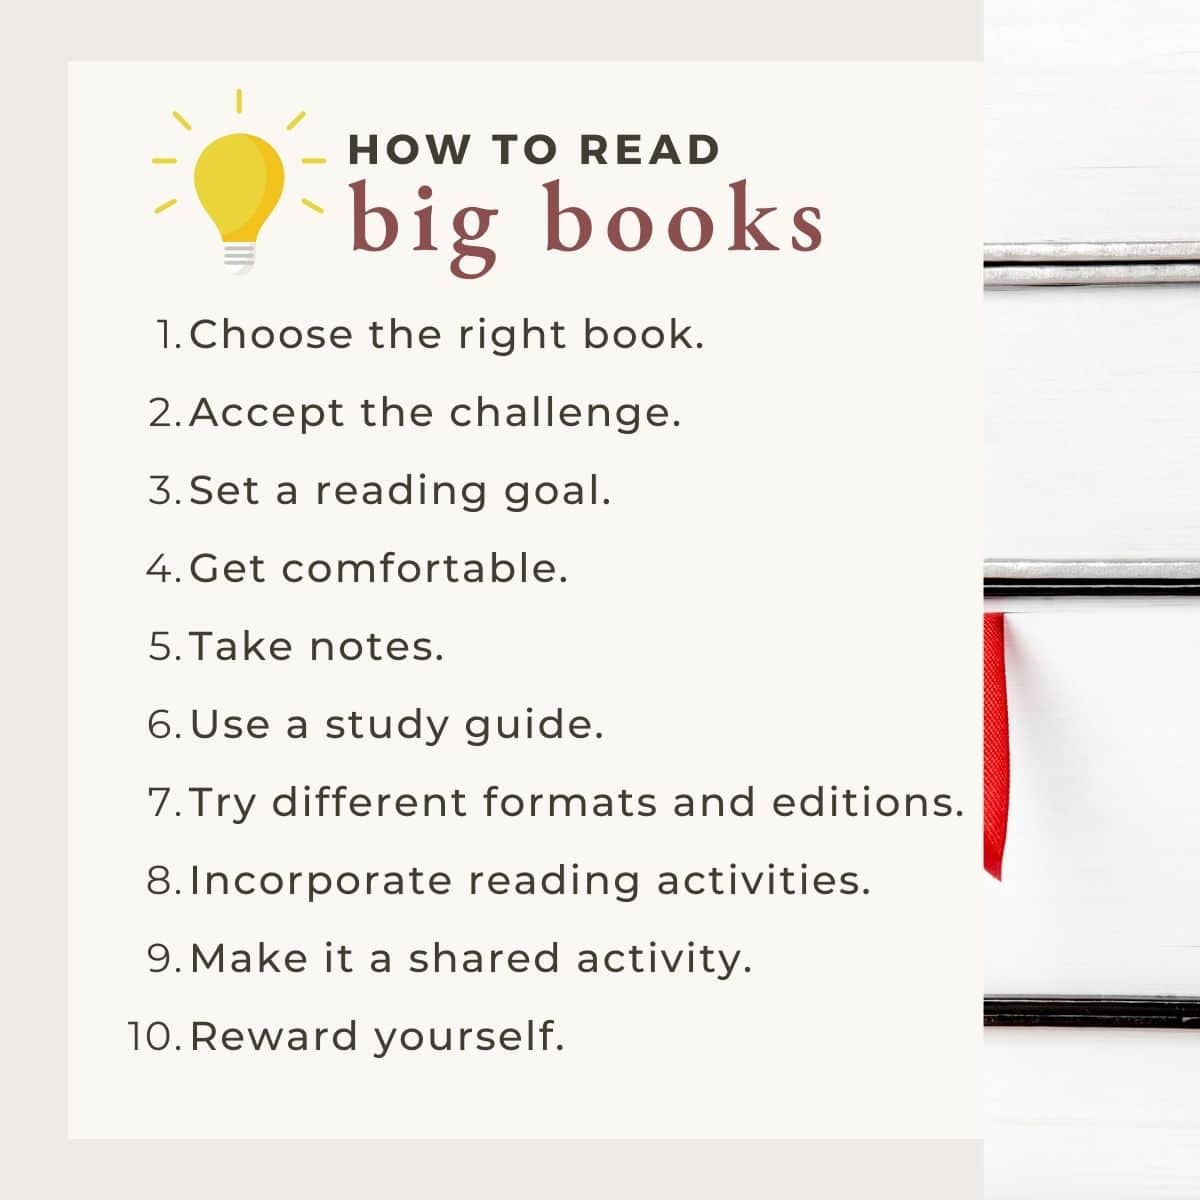 How to read big books infographic.